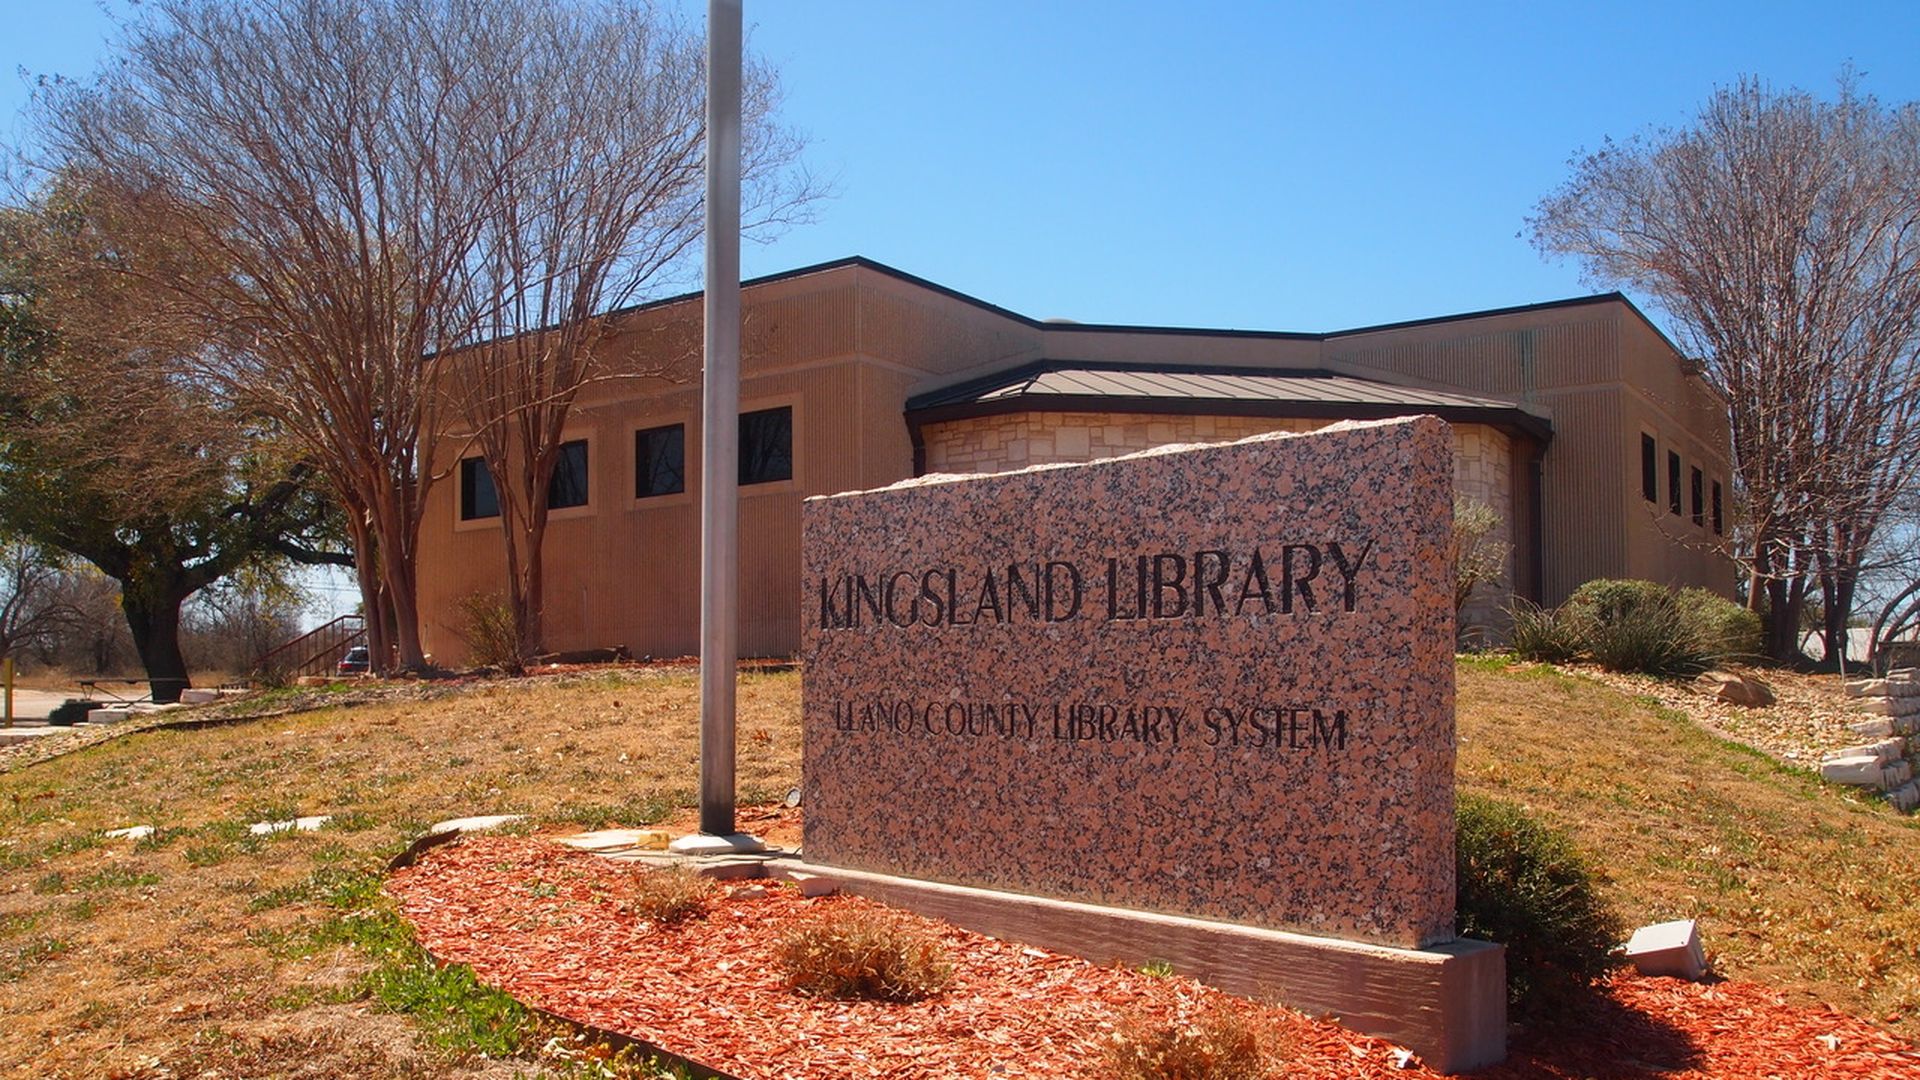 The exterior of the Kingsland library in Llano County